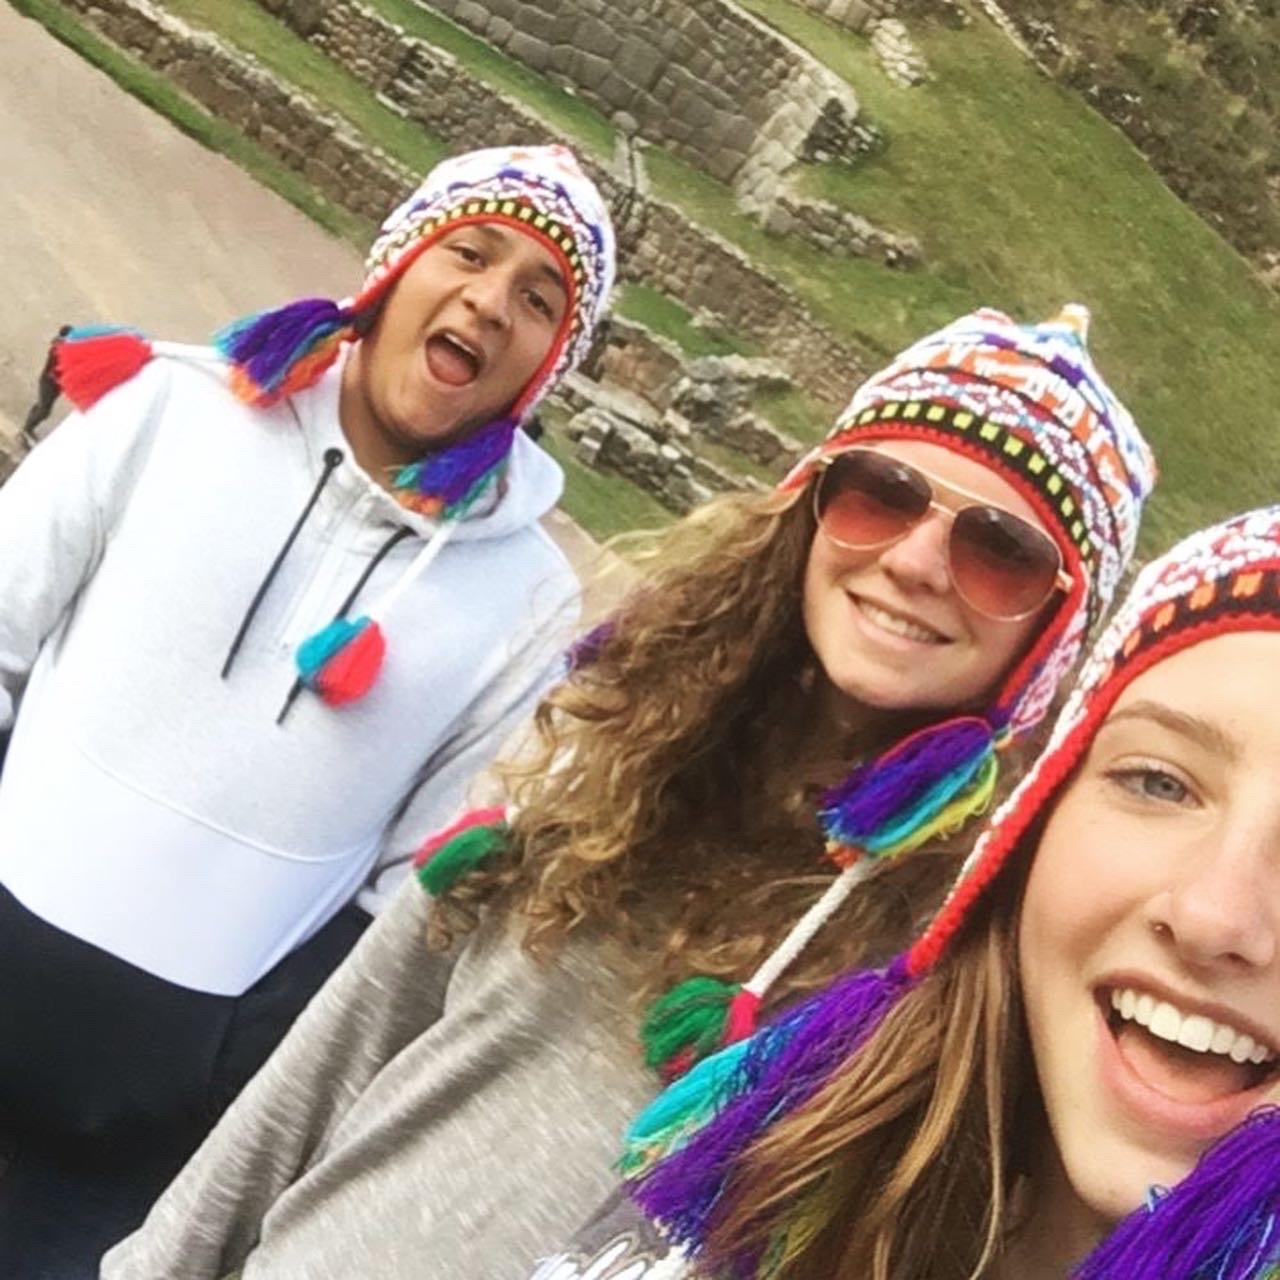 Borrowed some funny hats during a stop along the Sacred Valley in the Andes Mountains of Peru